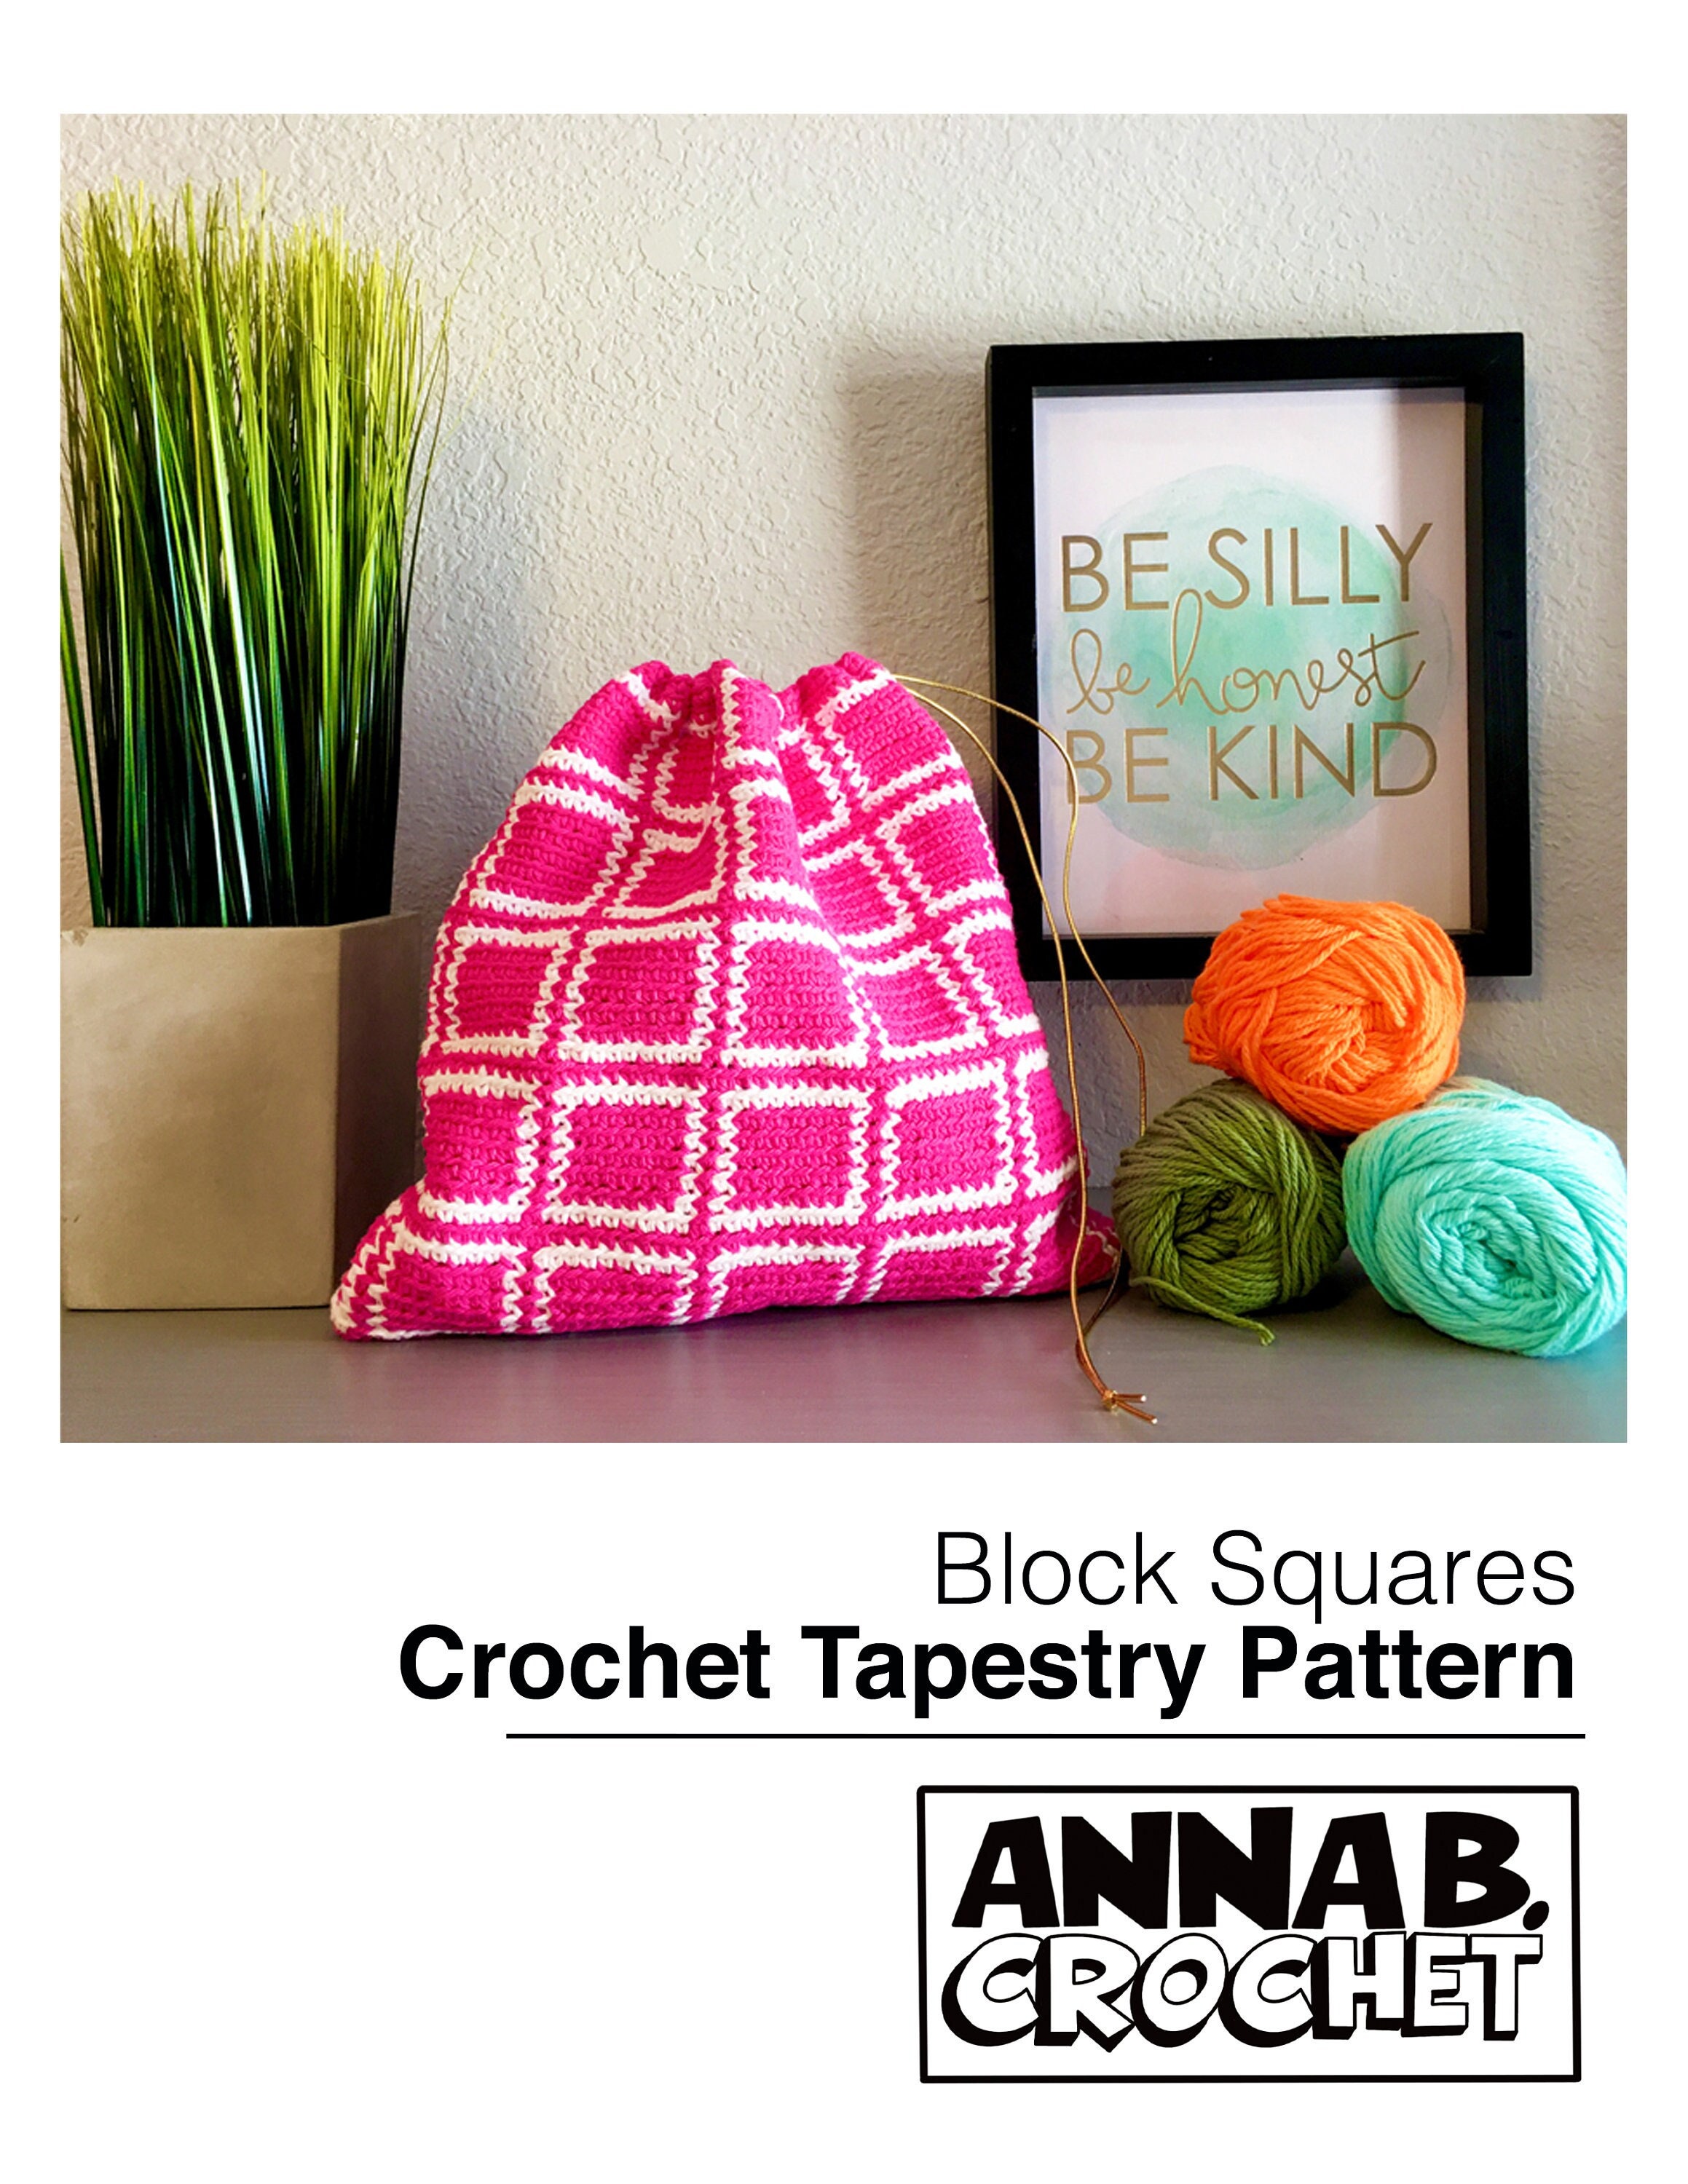 An easy tapestry crochet plaid square perfect for blankets